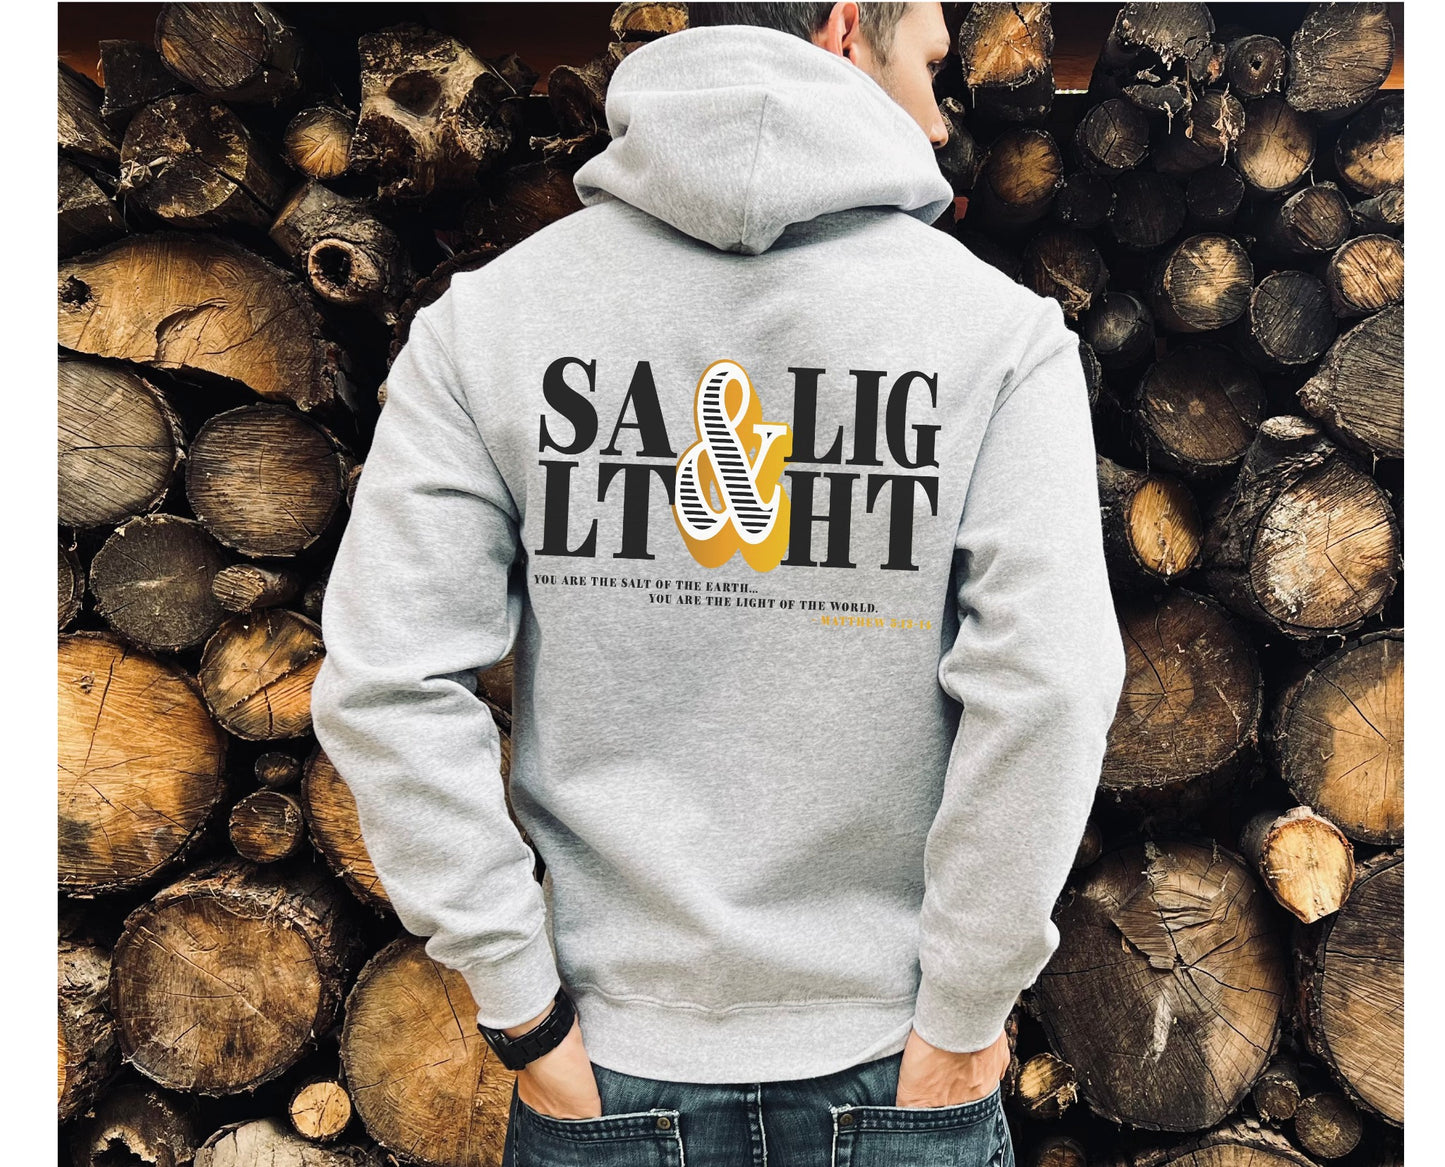 Retro Stacked Salt And Light Matthew 5 Christian bible verse design printed on front and back in black and gold on cozy heather gray unisex hoodie for men and women